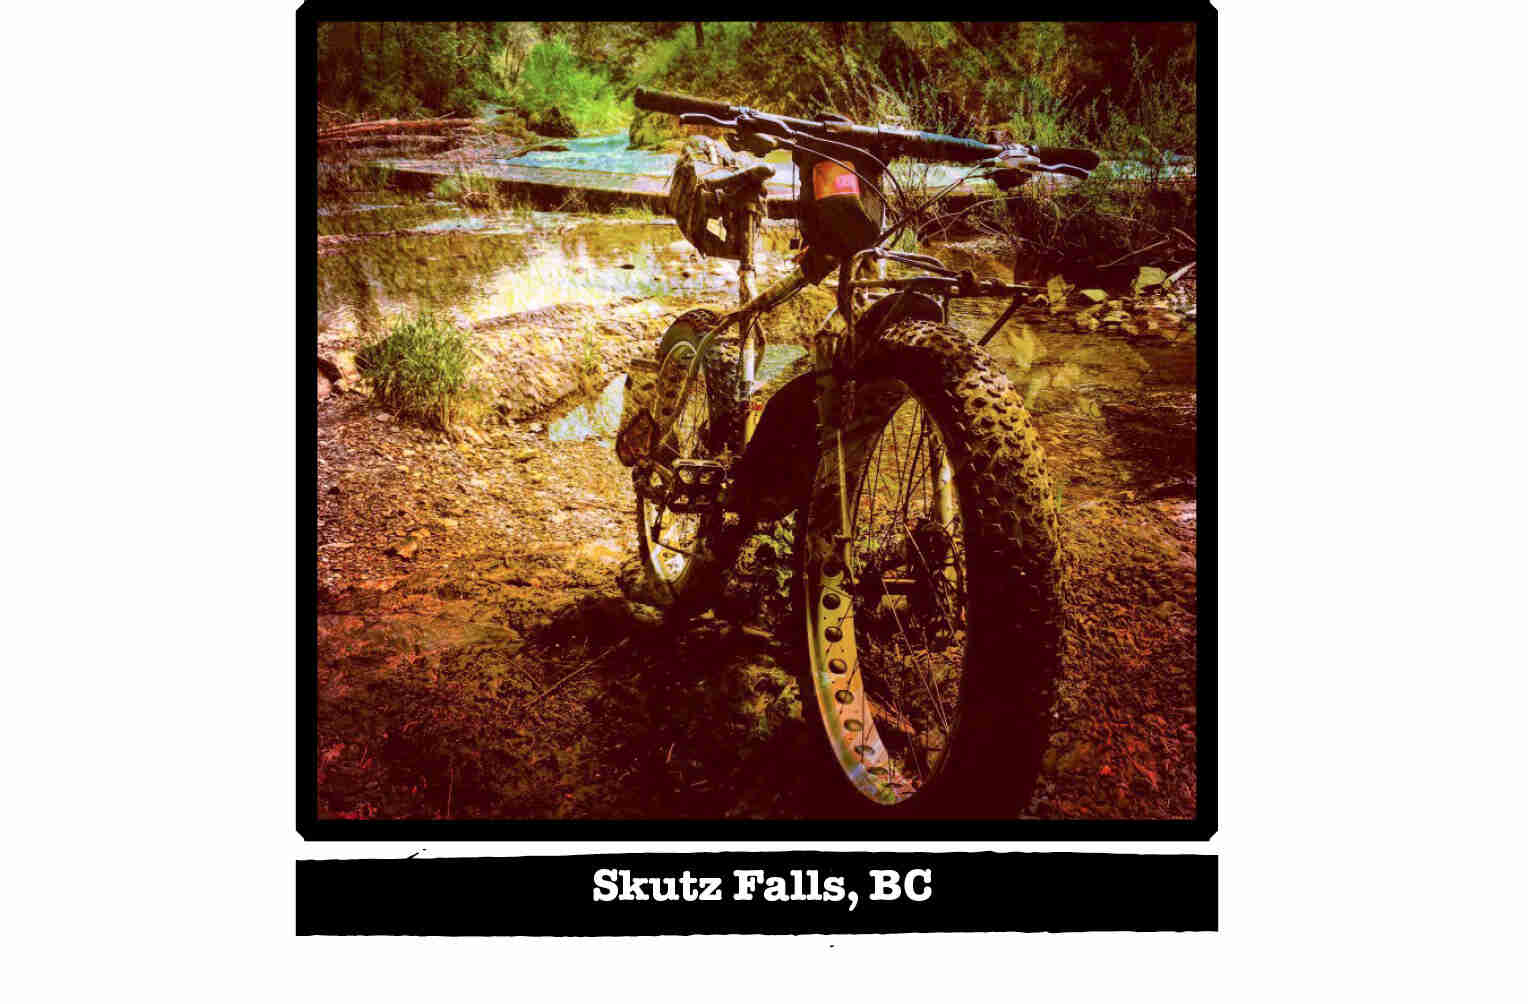 Front view of a Surly fat bike in a marsh - Skutz Falls, BC tag below image